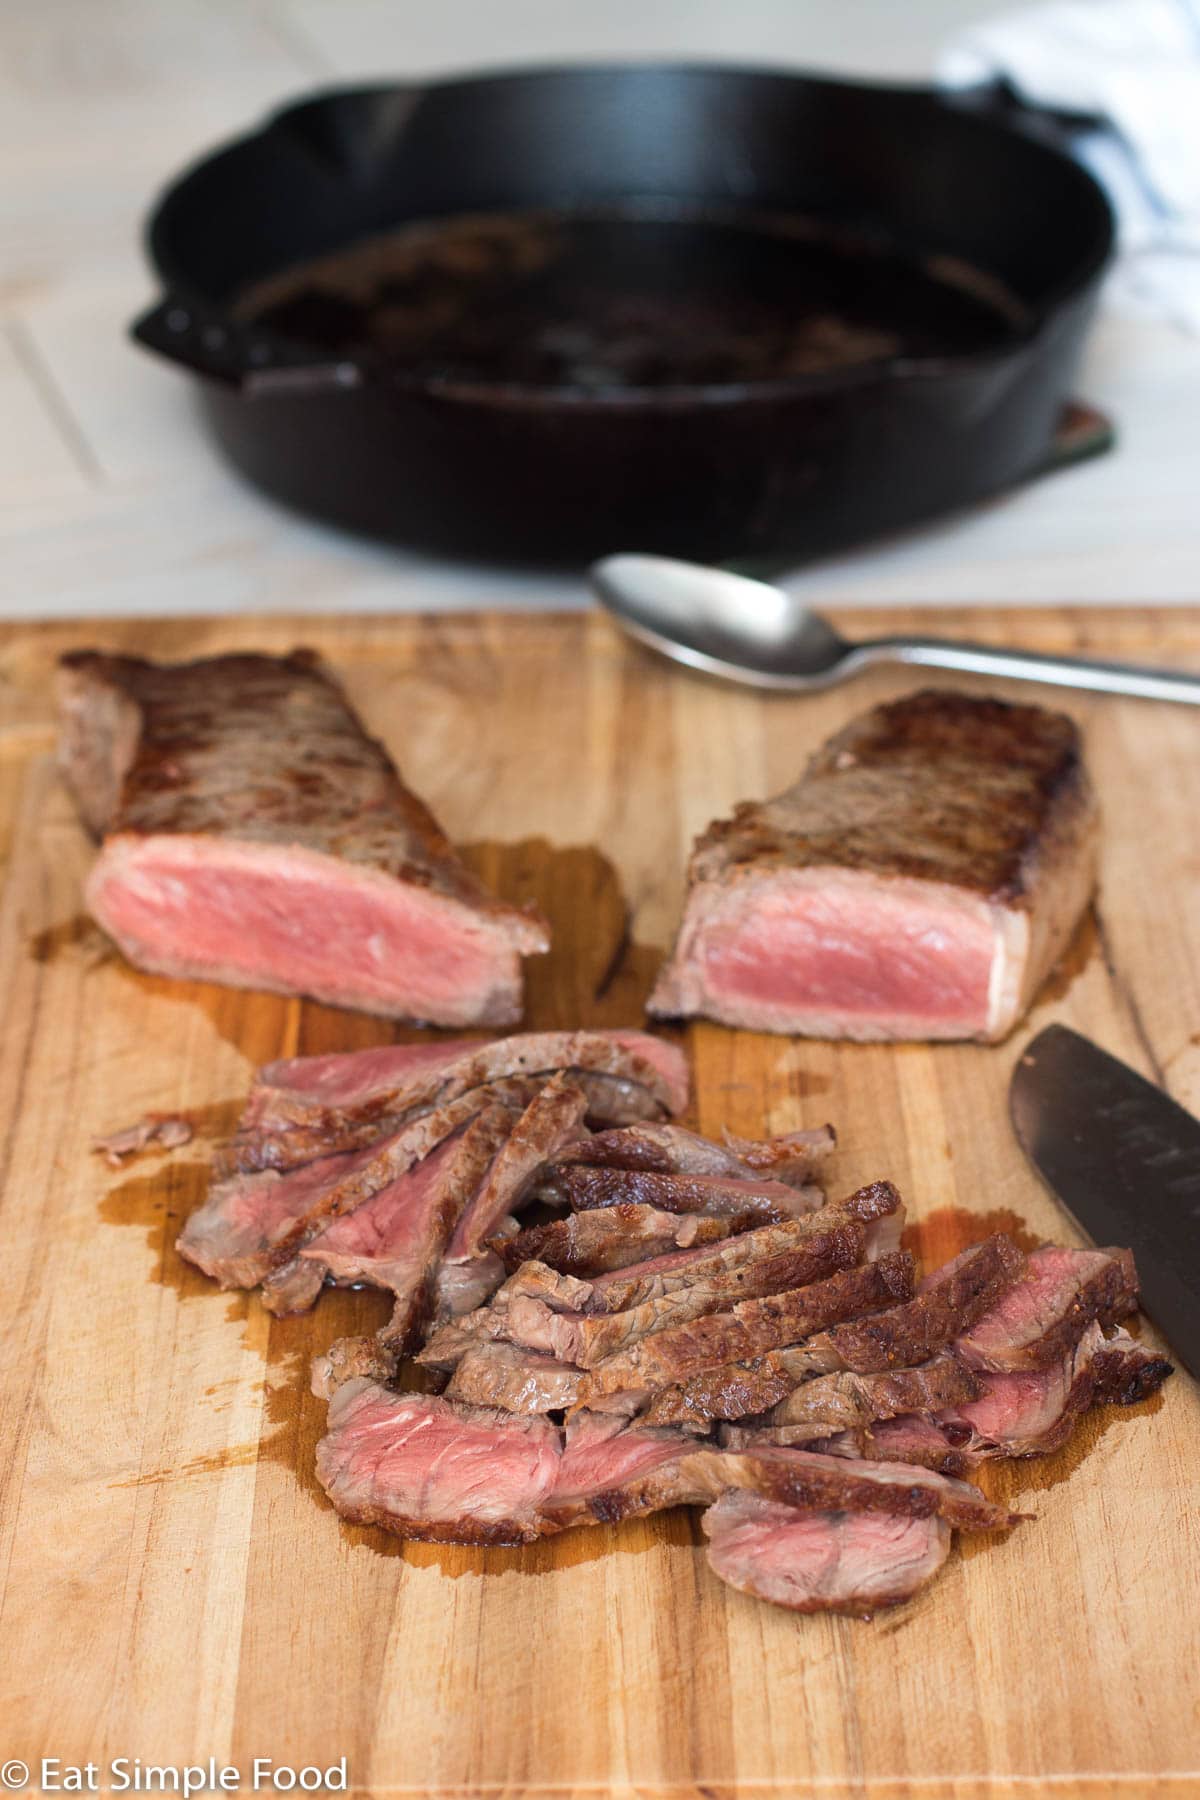 Two steaks on a wood cutting board with a chefs knife. Half of each steak is sliced and pink in the middle. Cast iron pan in background.